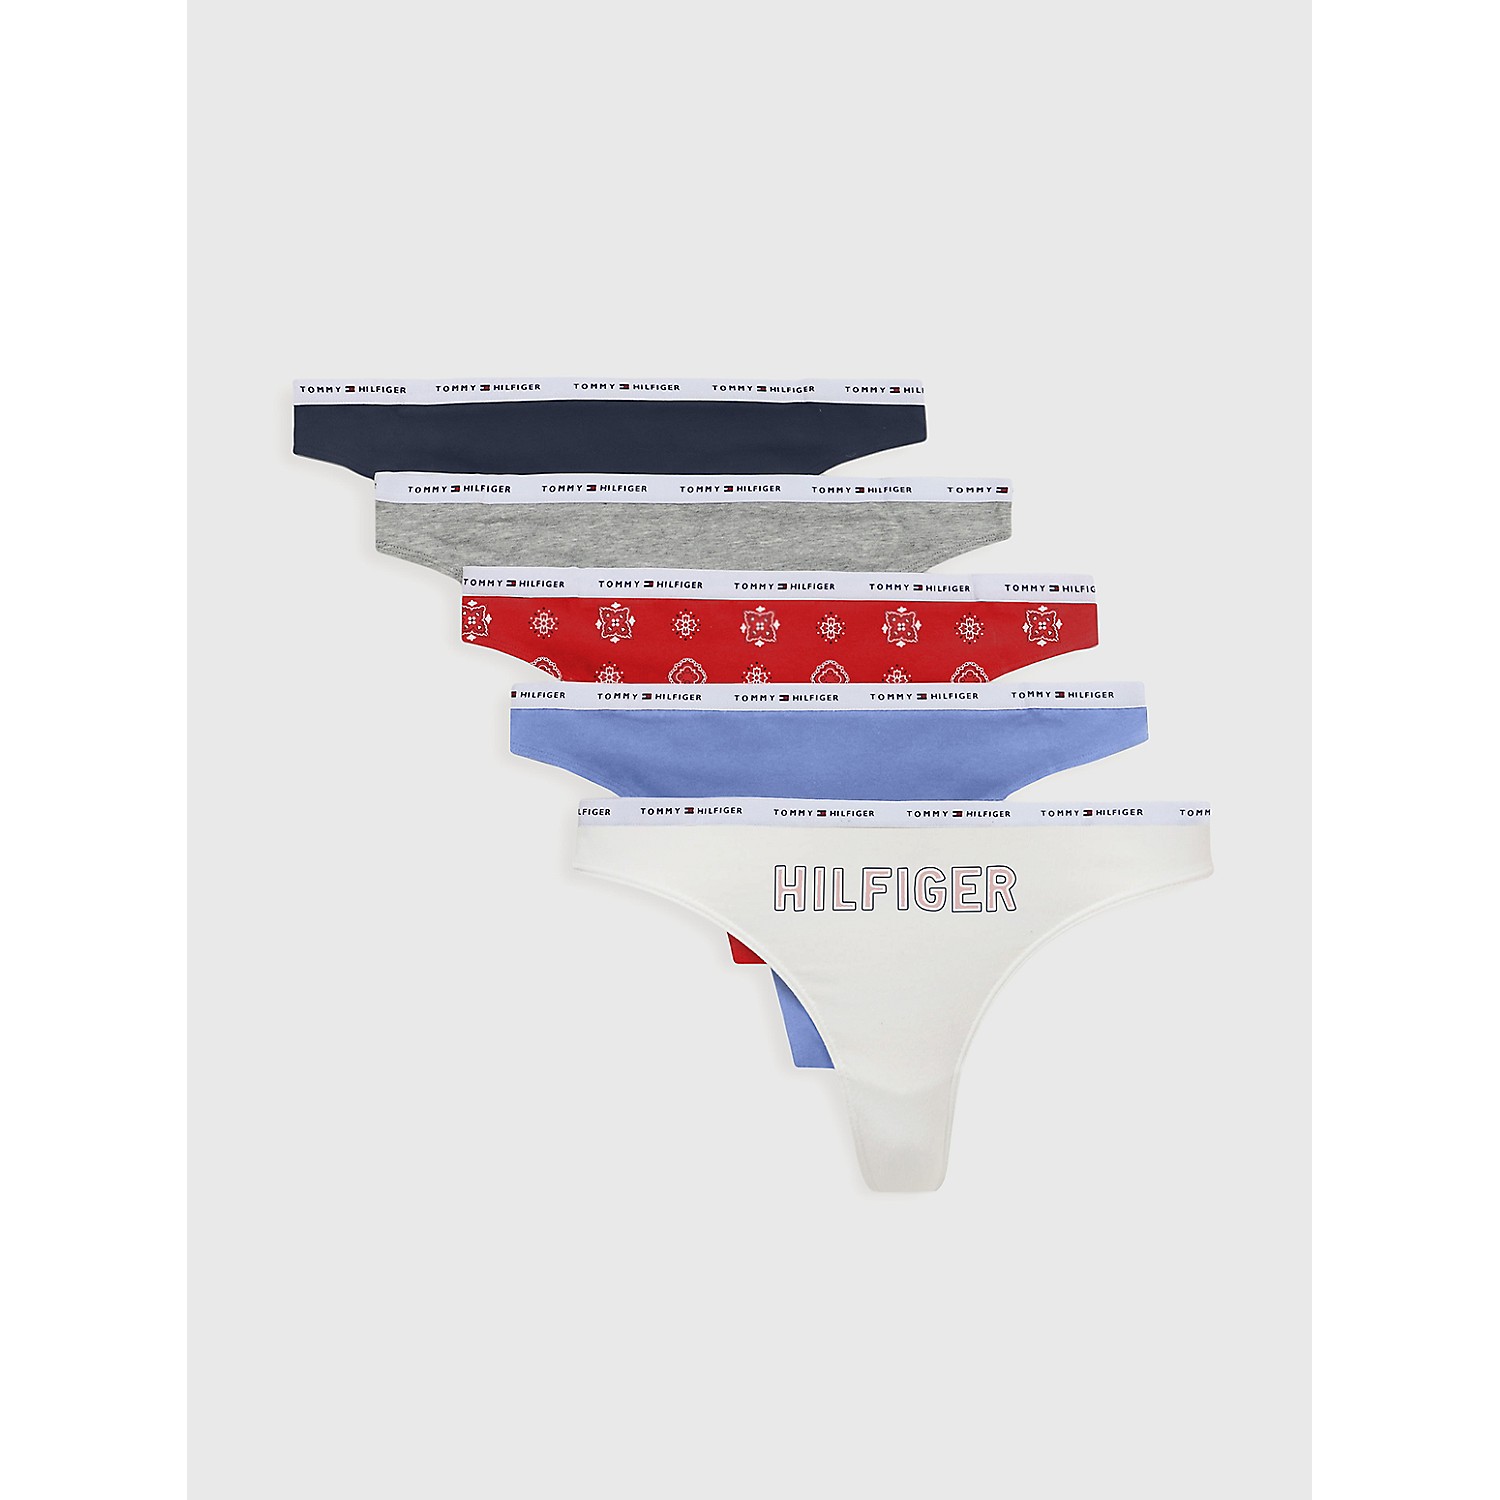 TOMMY HILFIGER Cotton Thong 5-Pack